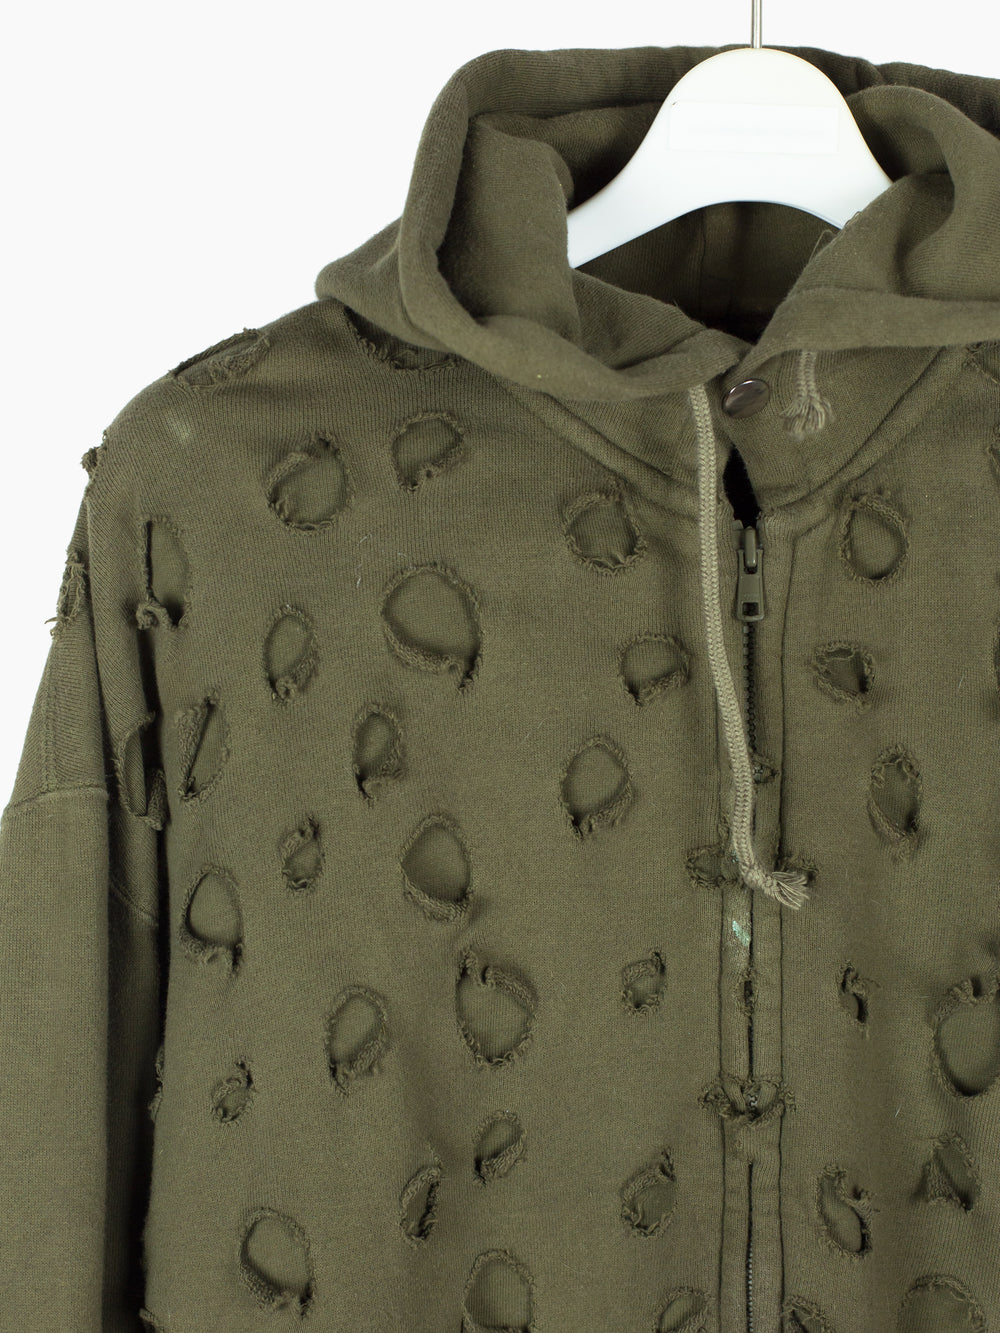 Toilet 90s Hole Punched Zip Hoodie